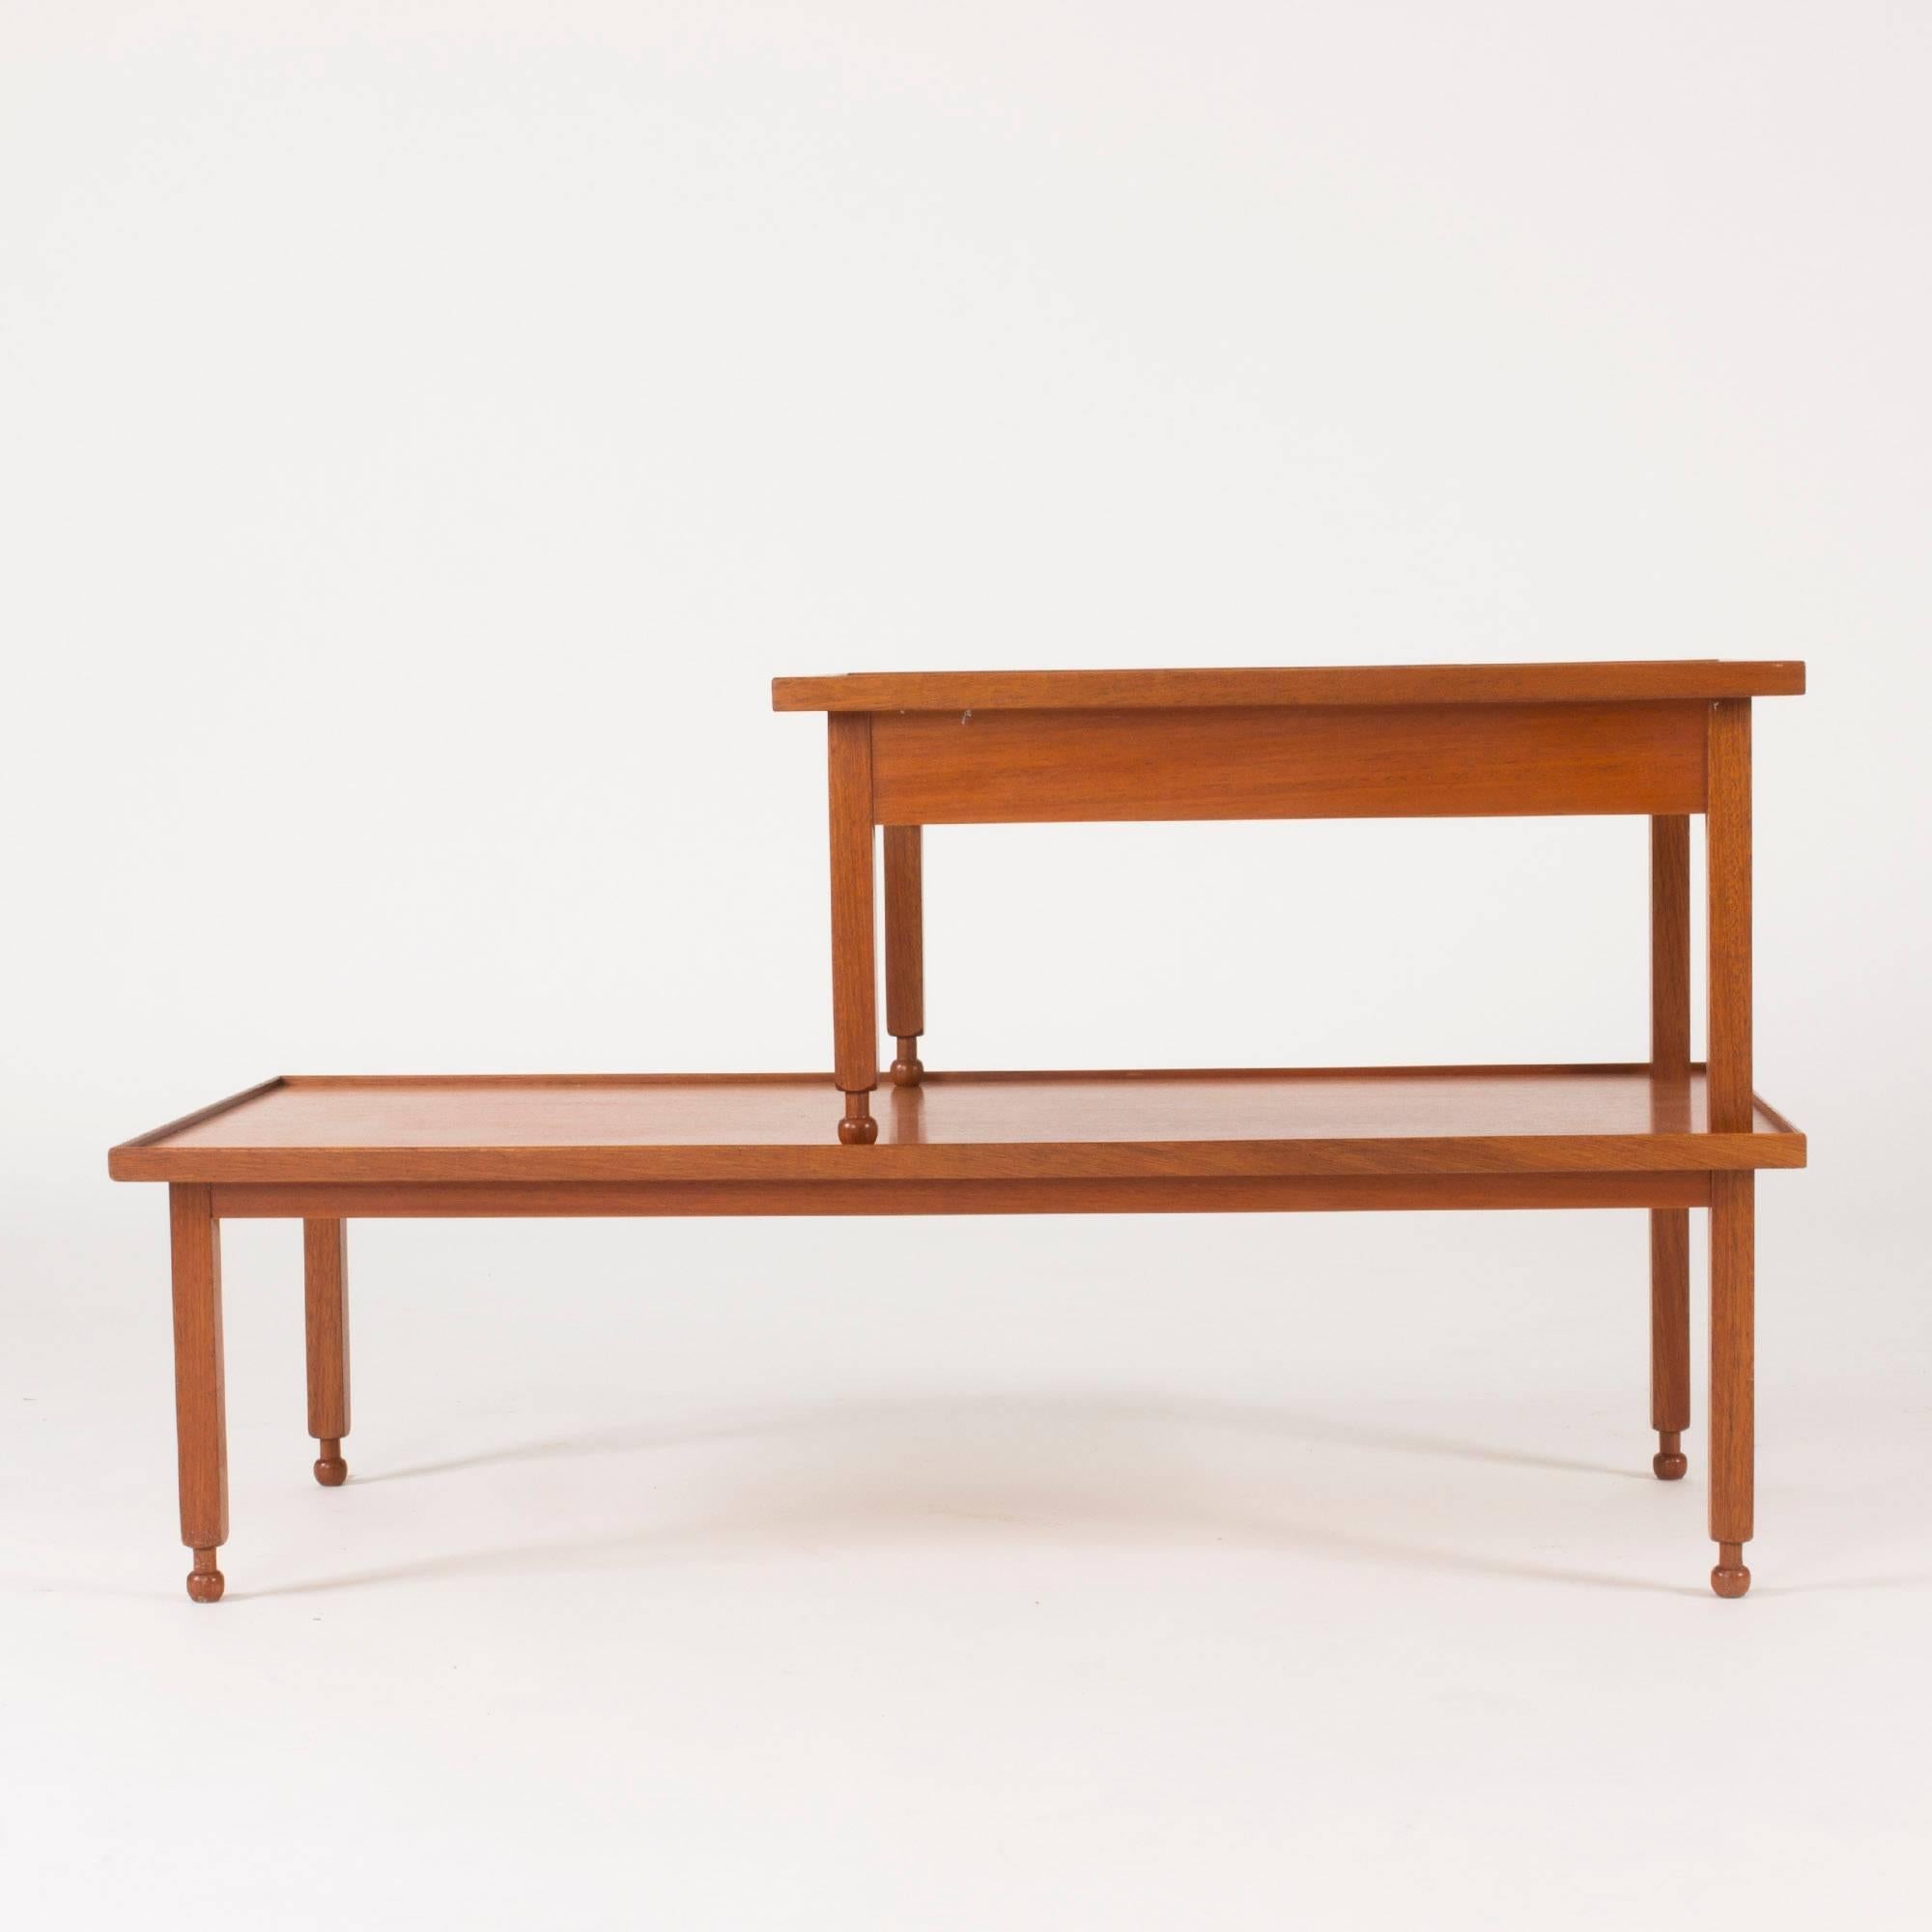 Beautiful, innovative side table by Josef Frank, made in mahogany. The upper section has a drawer with a brass handle. Lovely sculpted feet and rims framing the table tops.